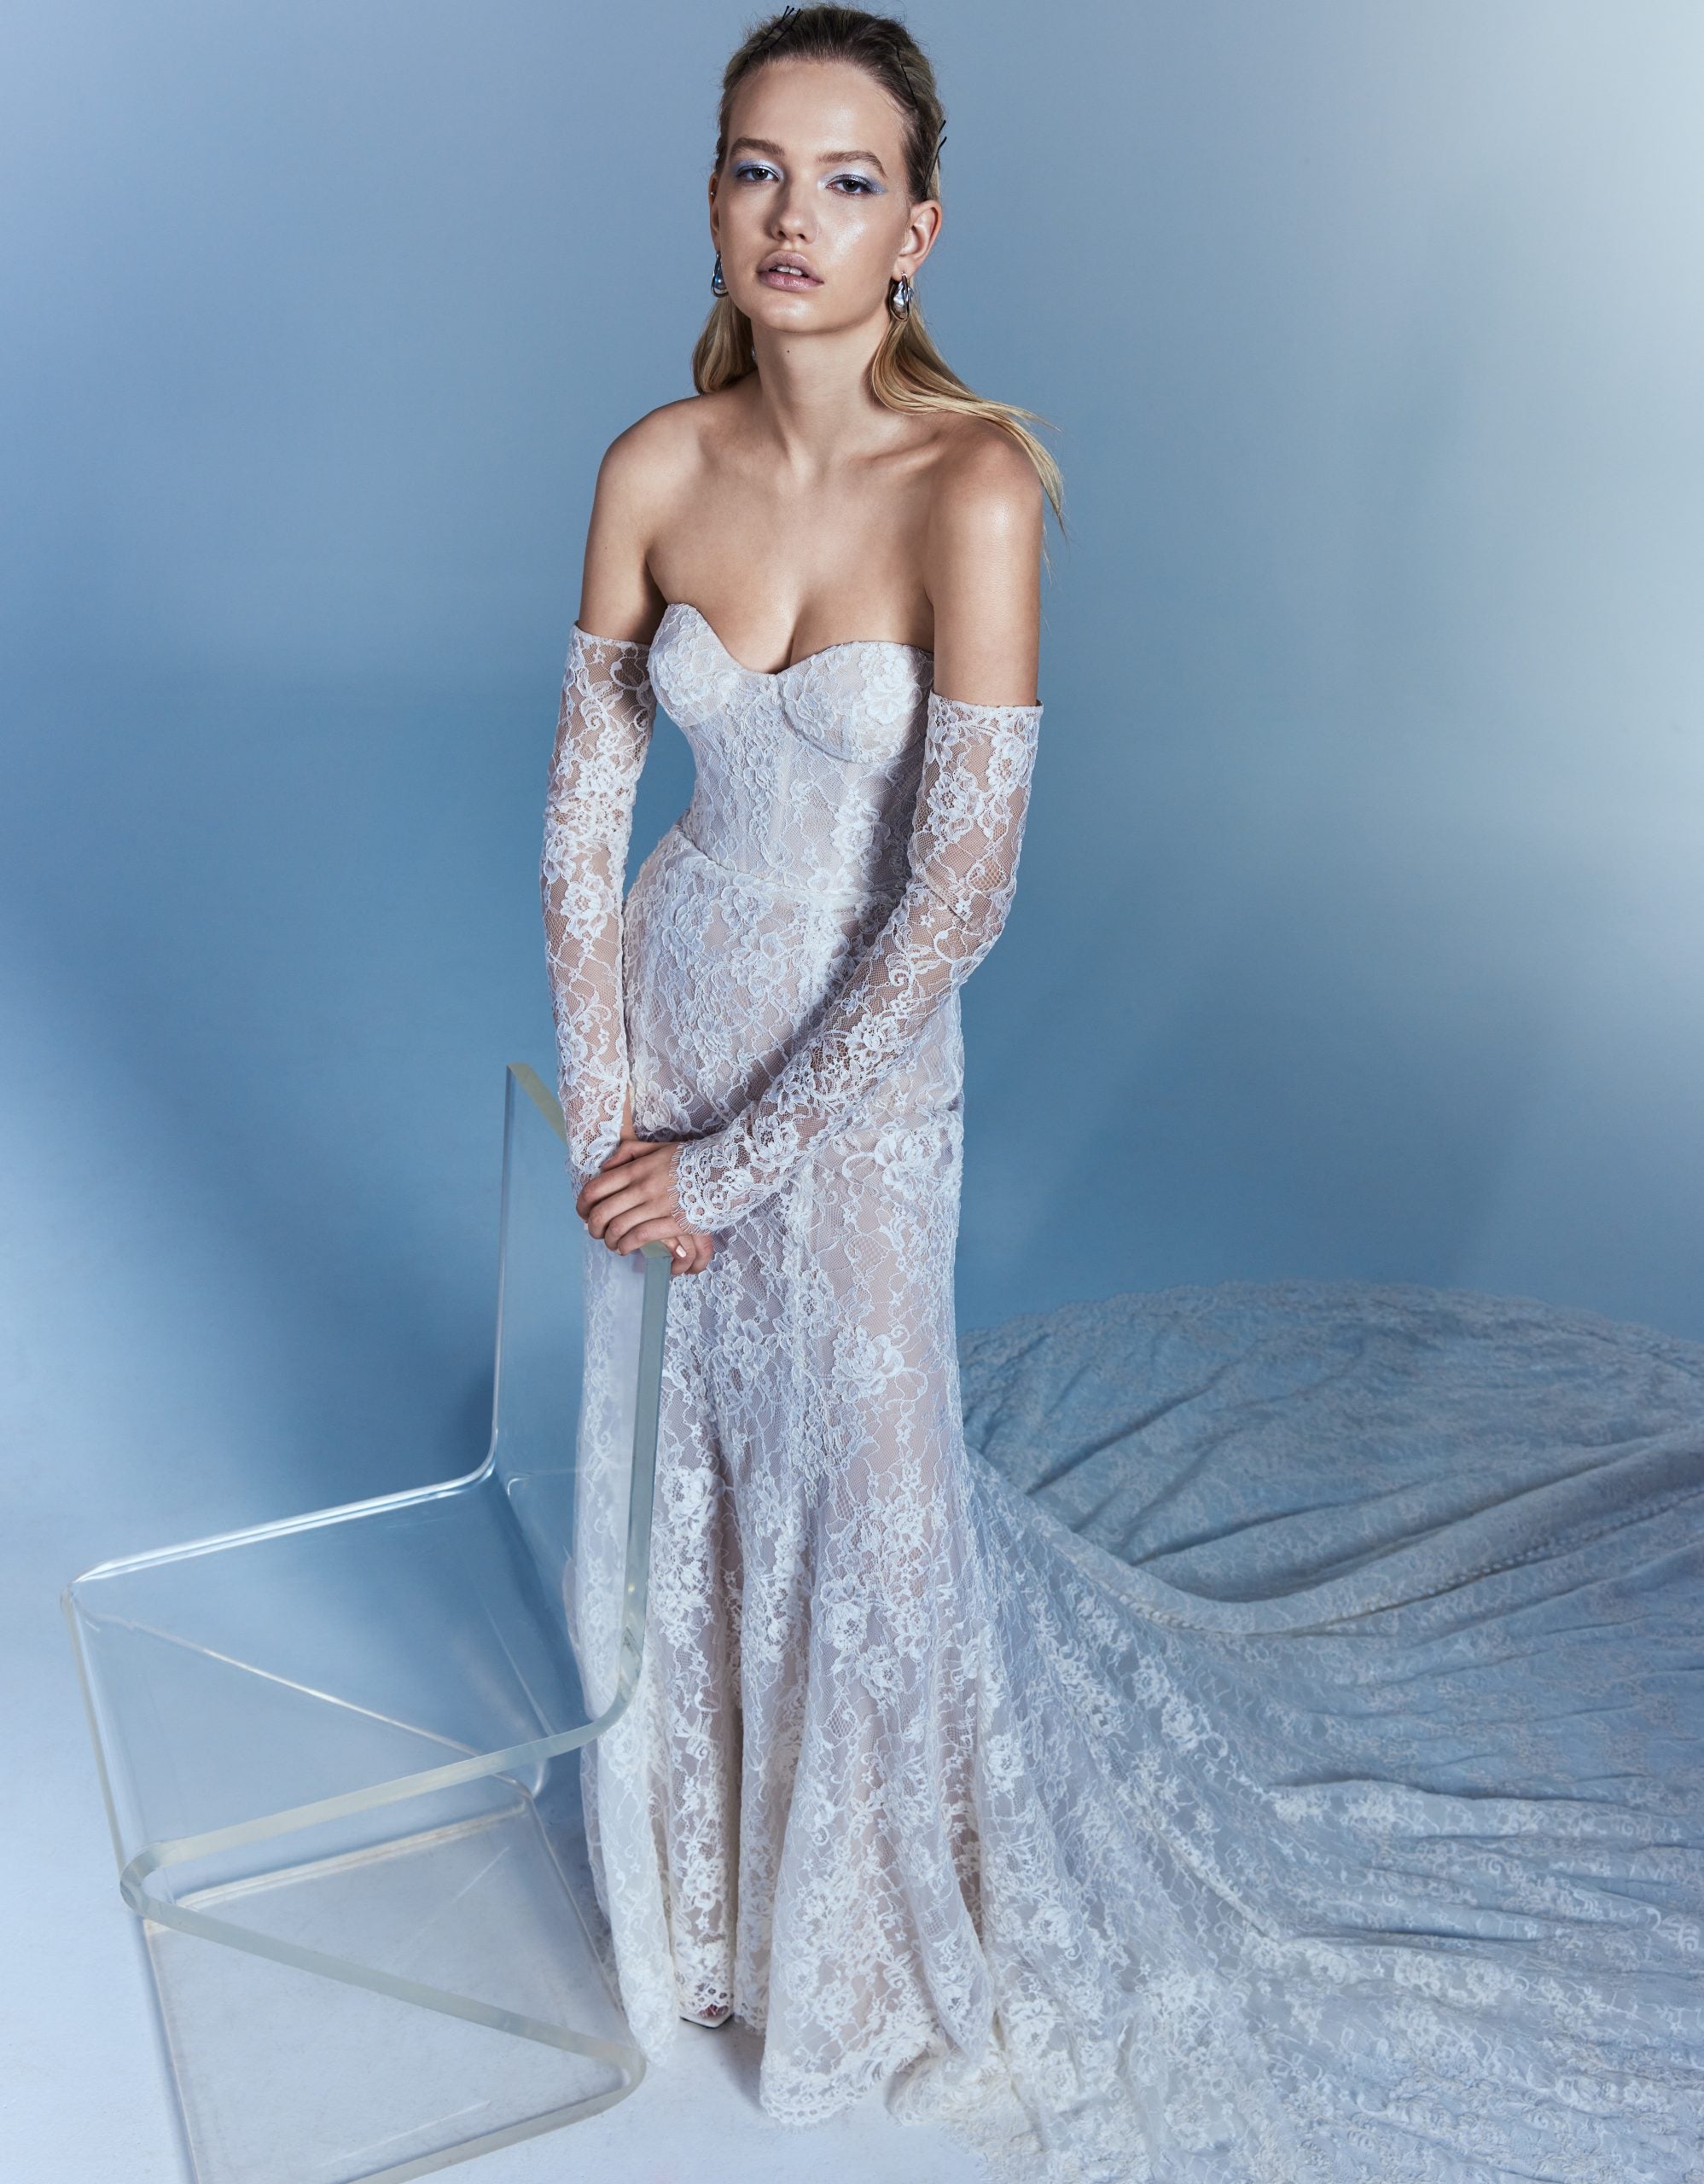 Sexy Fit And Flare Lace Gown With Detachable Sleeves by Alyne by Rita Vinieris